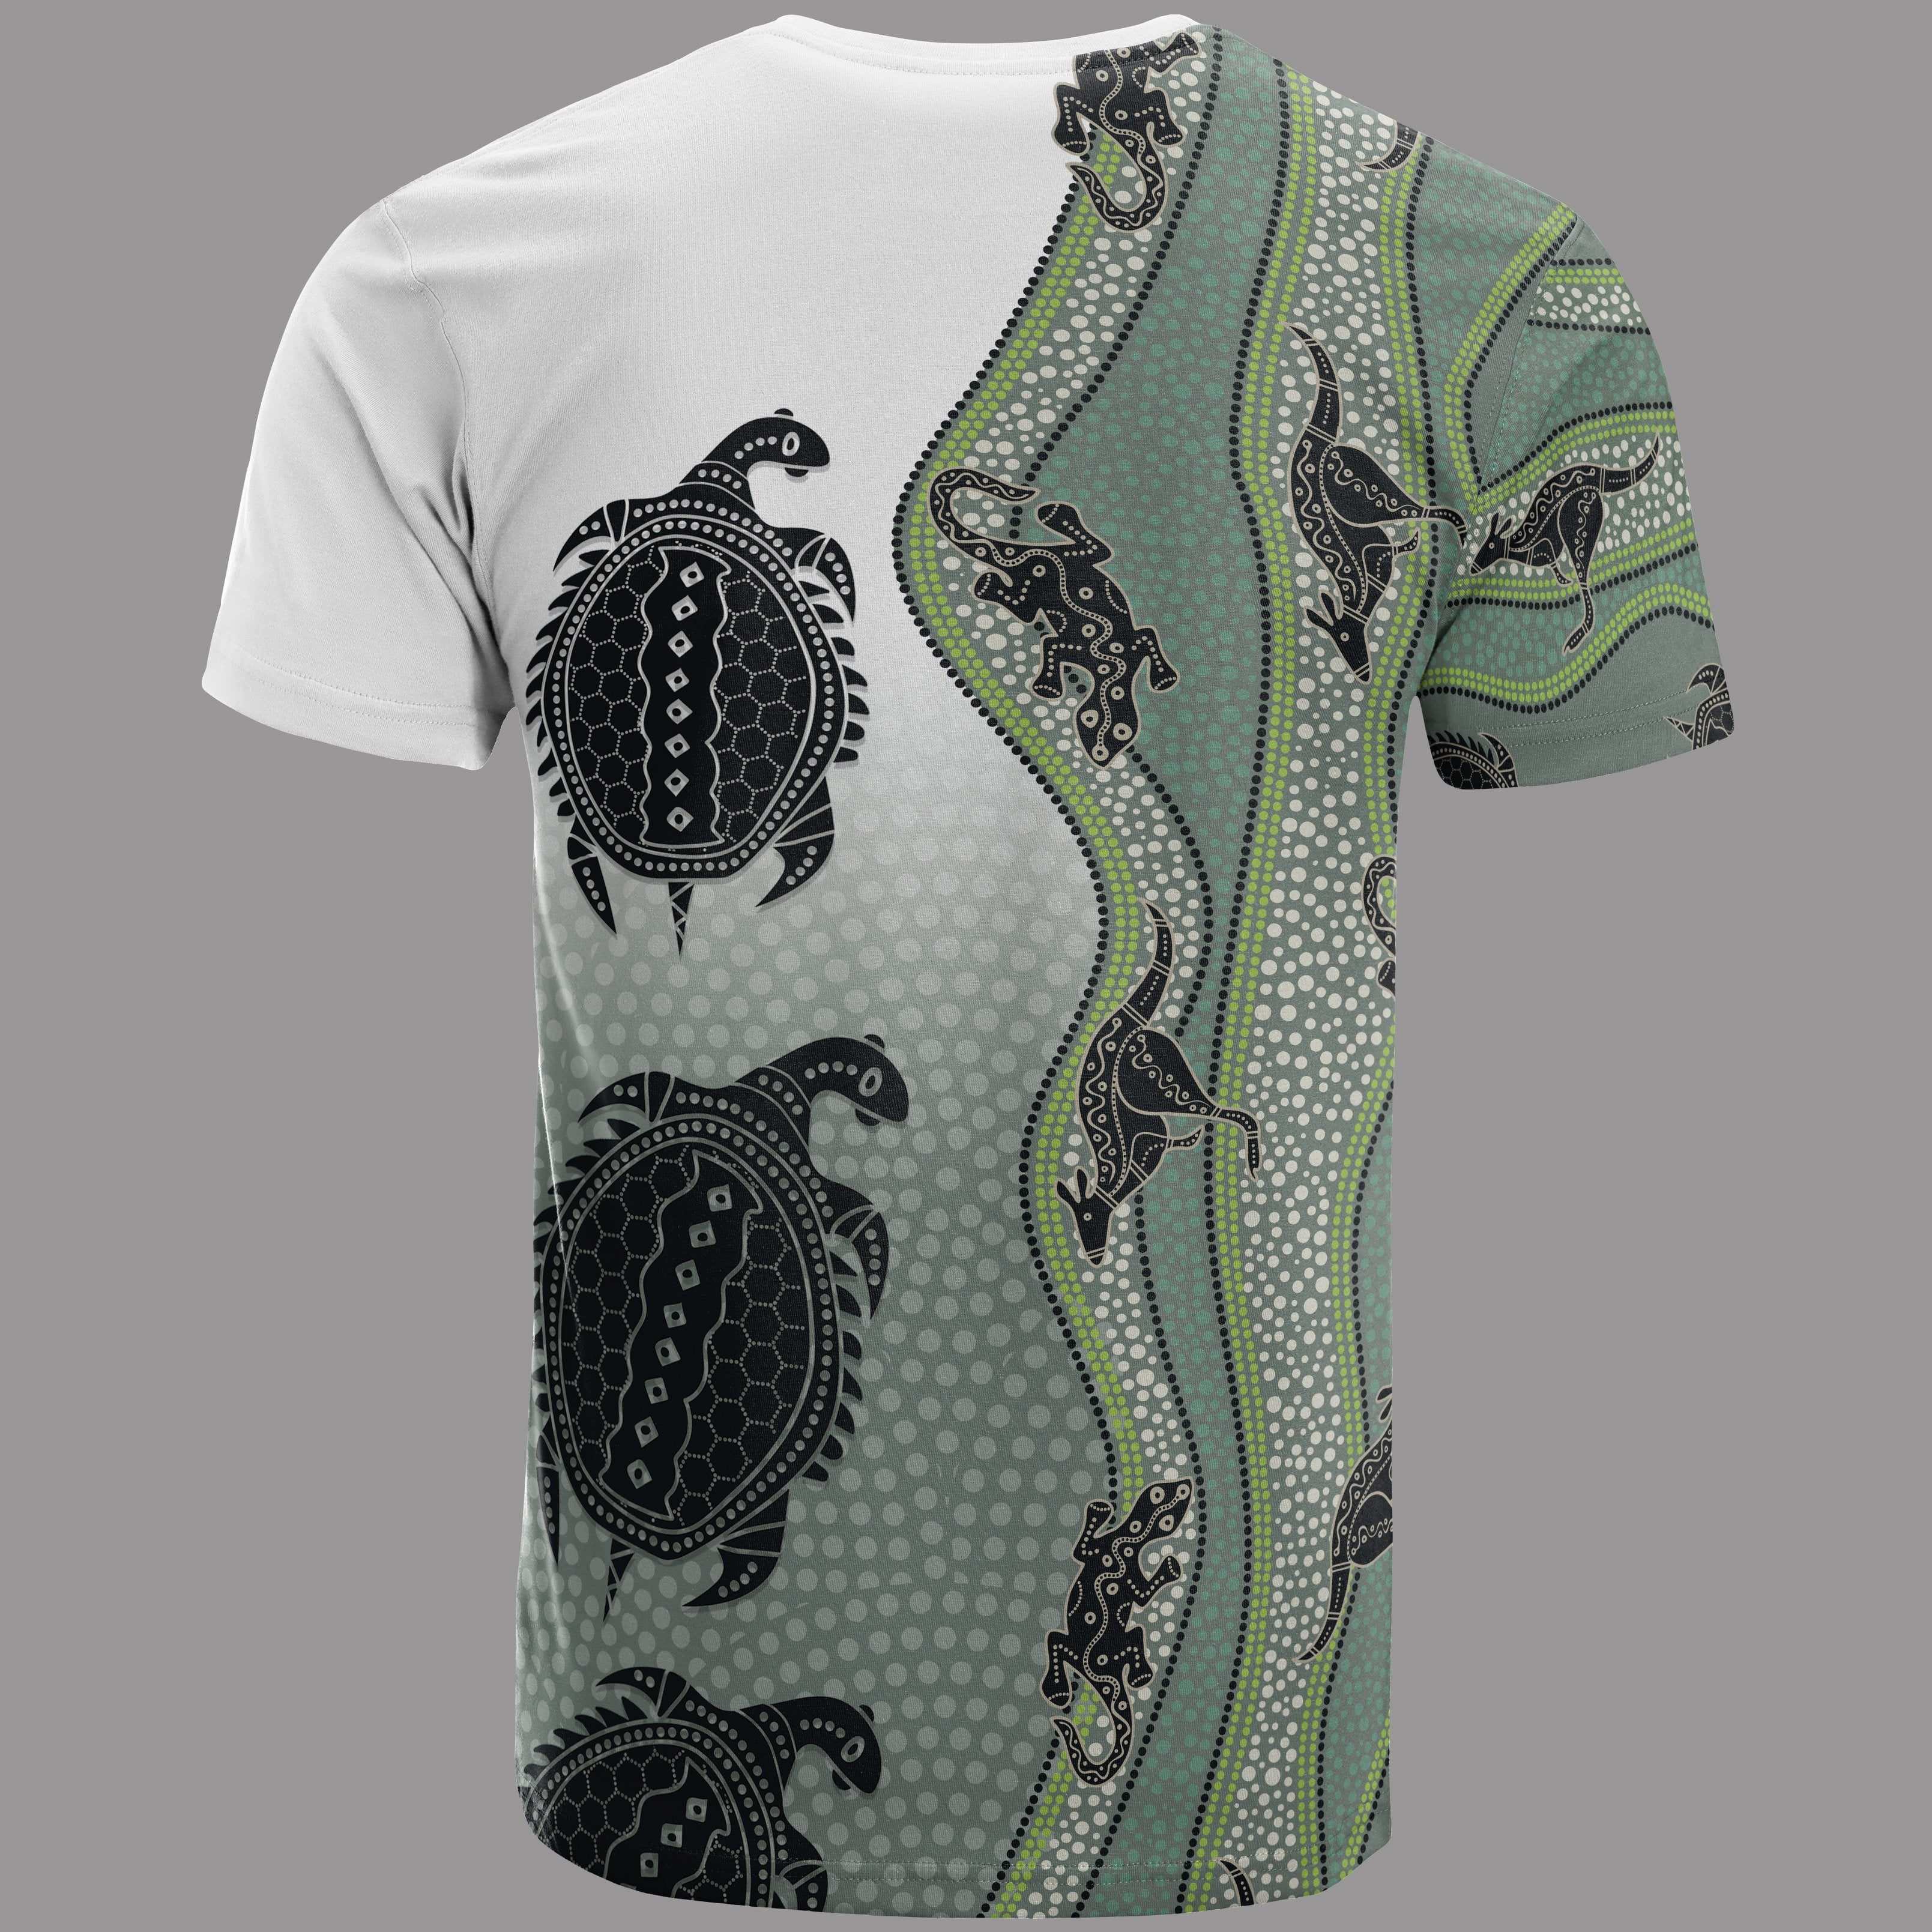 t-shirt-aboriginal-with-kangaroo-lizard-turtle-and-dotted-crooked-stripes-pattern